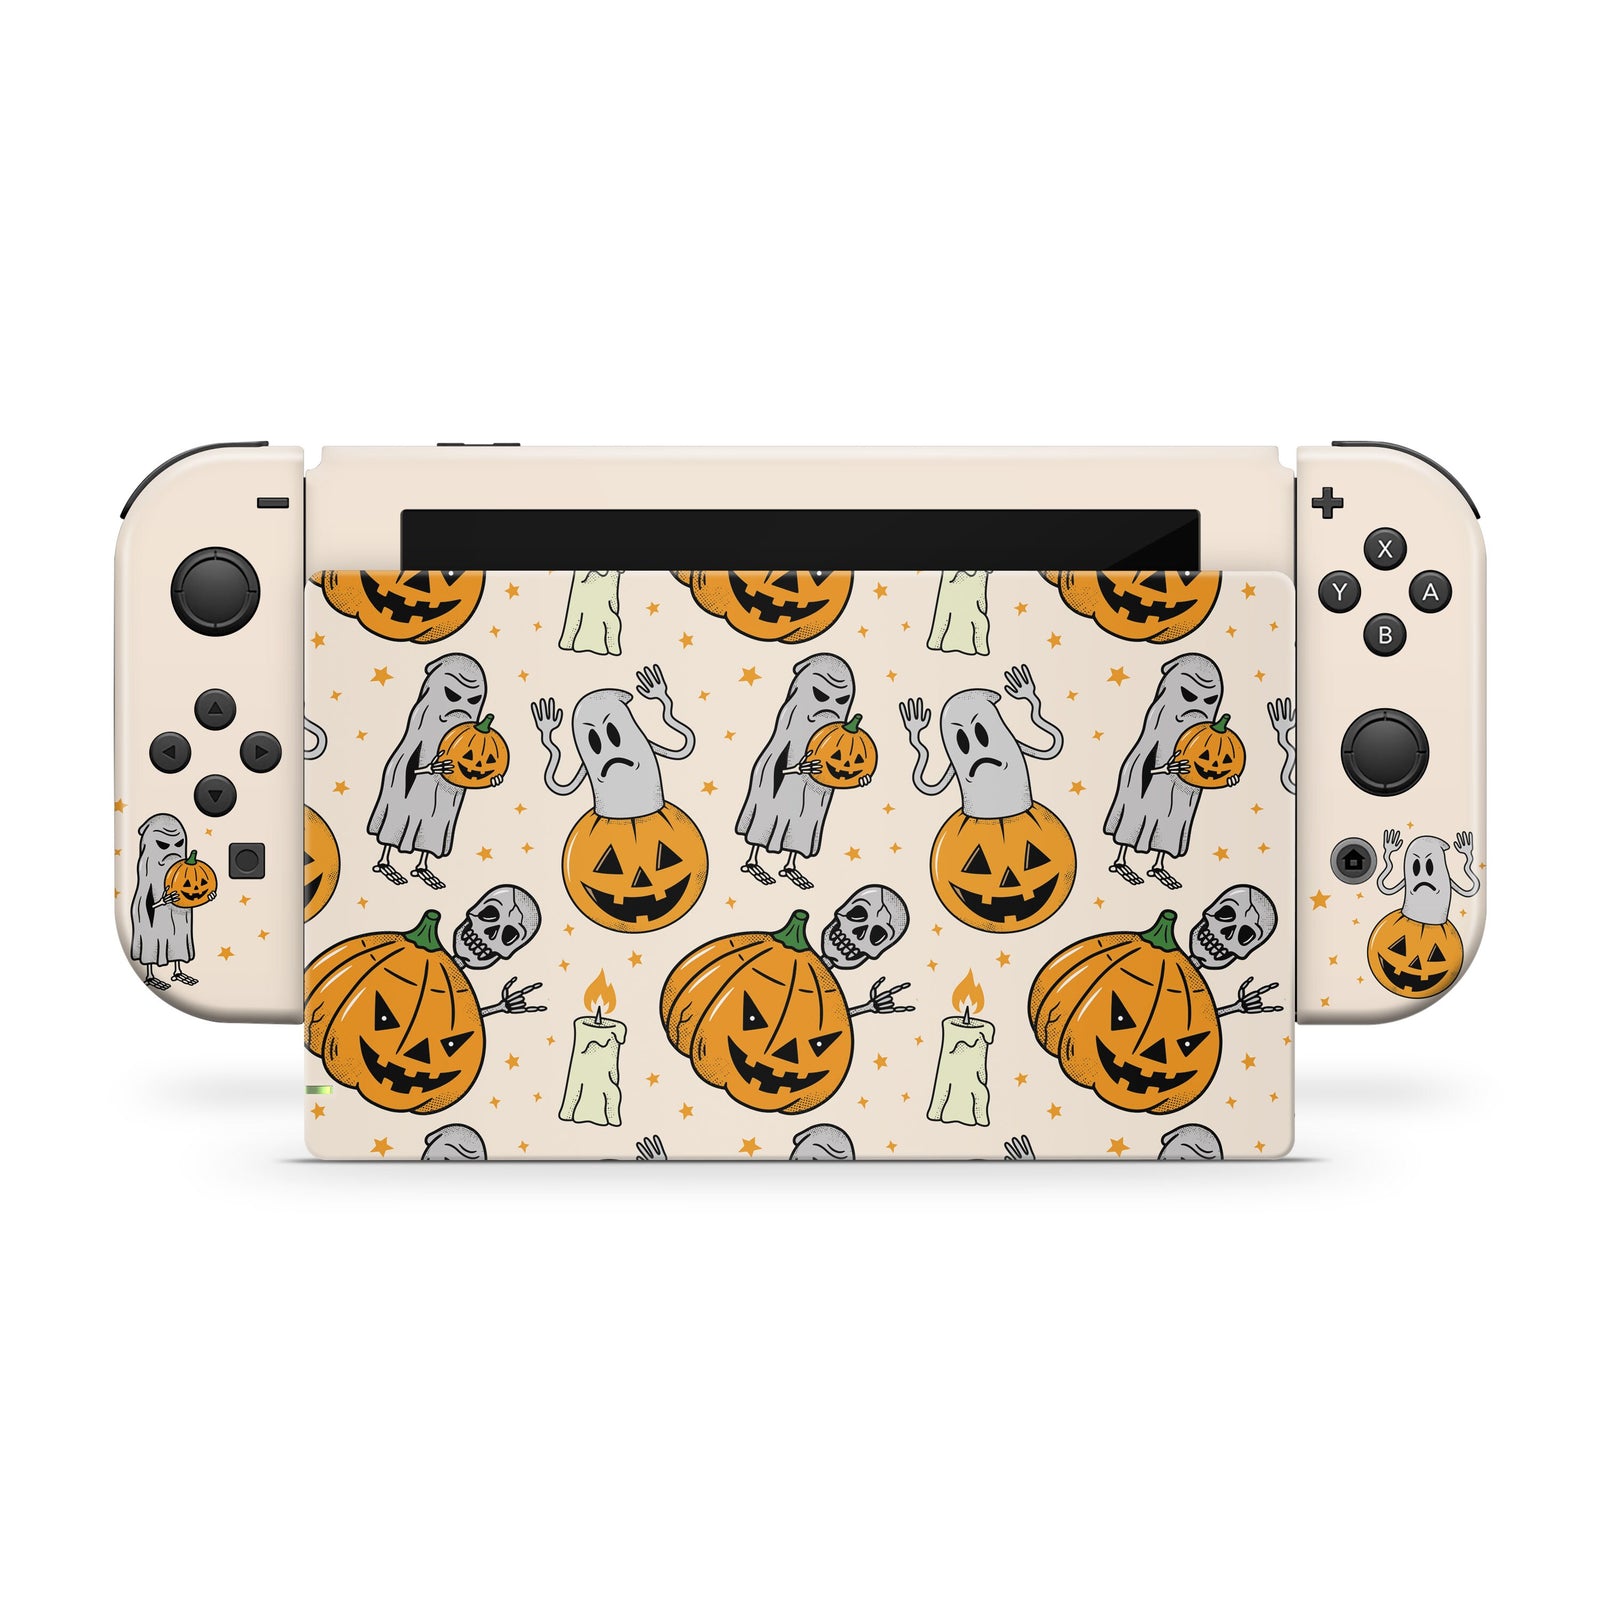  Tacky Design Retro Skin Compatible with Nintendo Switch Skin -  Premium Vinyl 3M Brown Colorwave,Color Blocking Nintendo Switch Stickers  Set - Switch Skin for Console, Dock, Joy Con - Decal Full